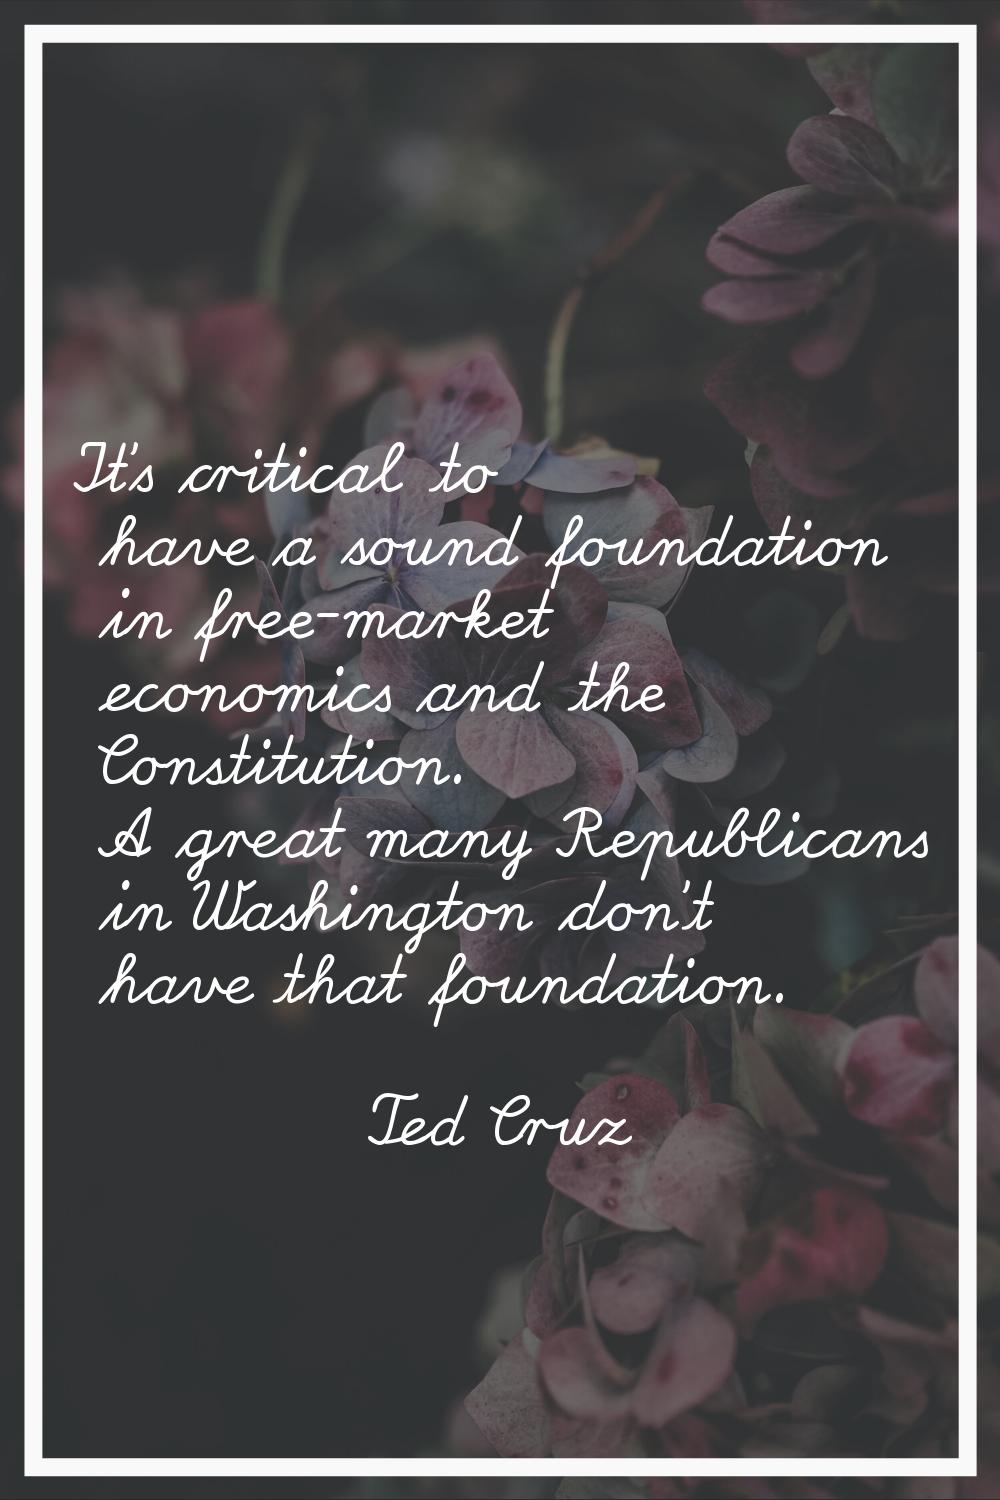 It's critical to have a sound foundation in free-market economics and the Constitution. A great man